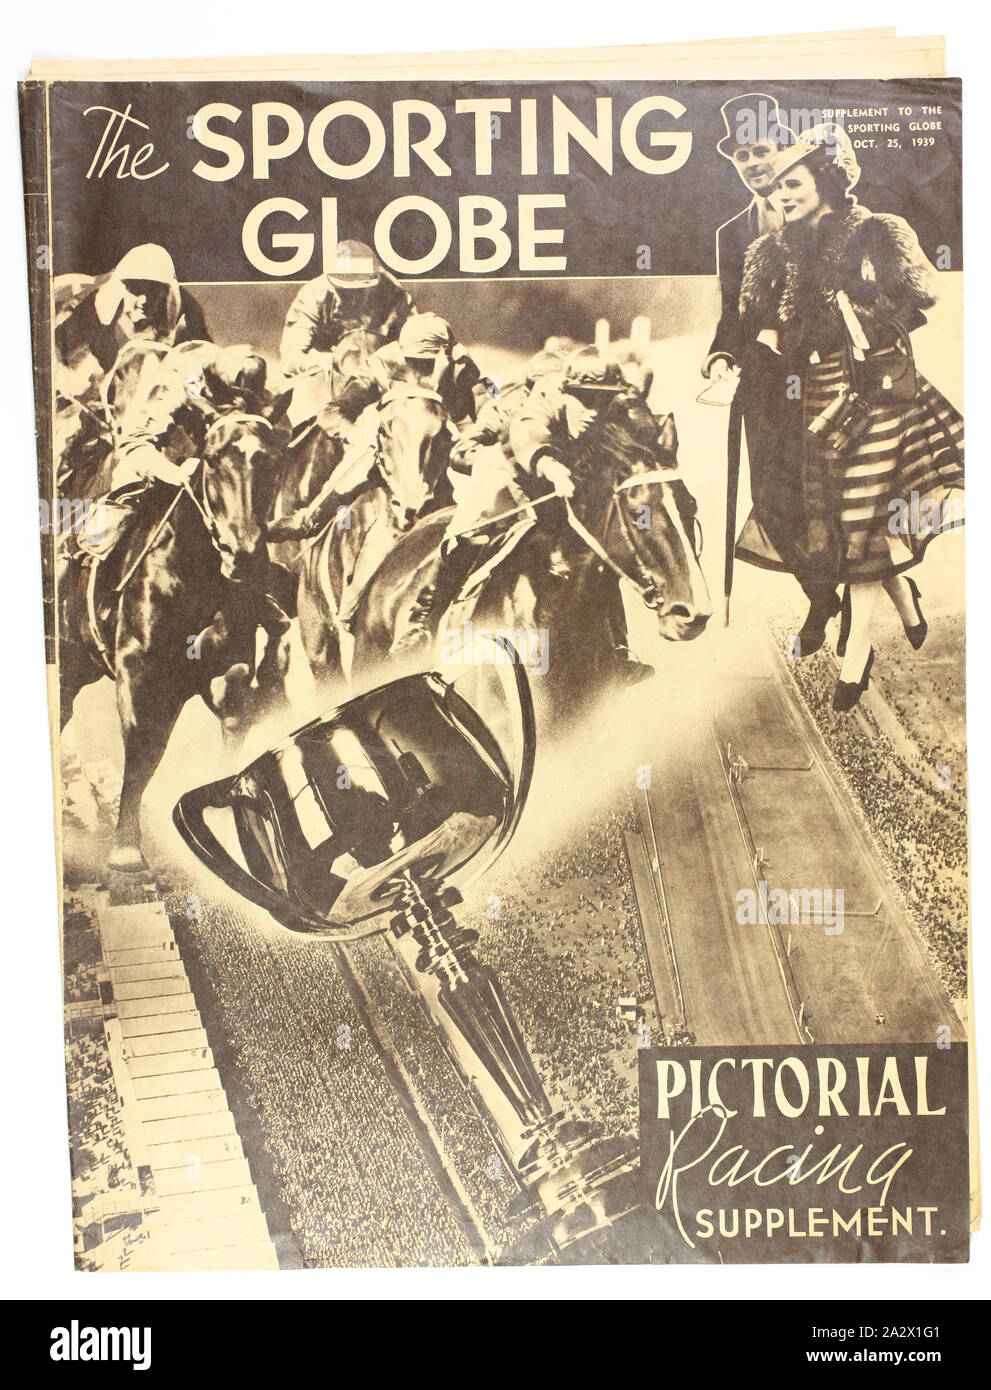 Newspaper Supplement - Sporting Globe, Melbourne Cup, 1939, This A3 sized newspaper supplement was issued with the Sporting Globe on October 25th, 1939, to promote the upcoming Melbourne Cup Carnival Stock Photo